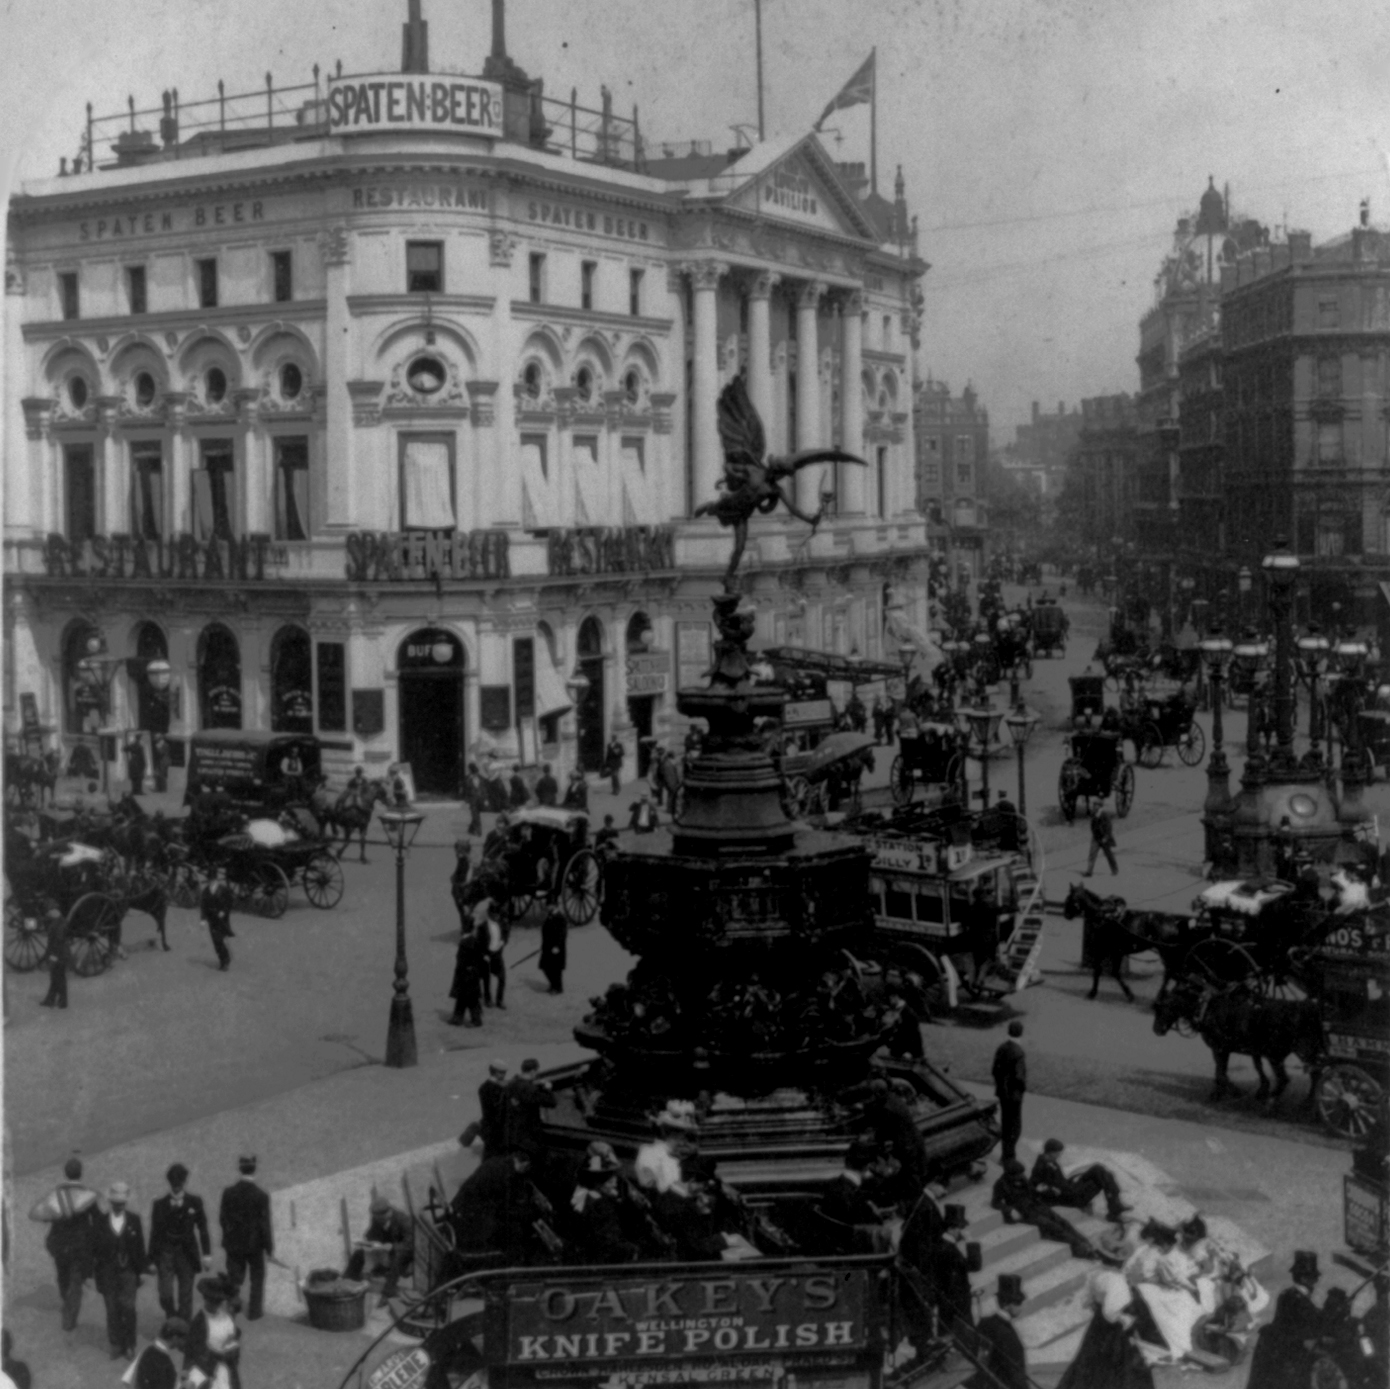 In the heart of modern Babylon Piccadilly Circus, London, England, 1896